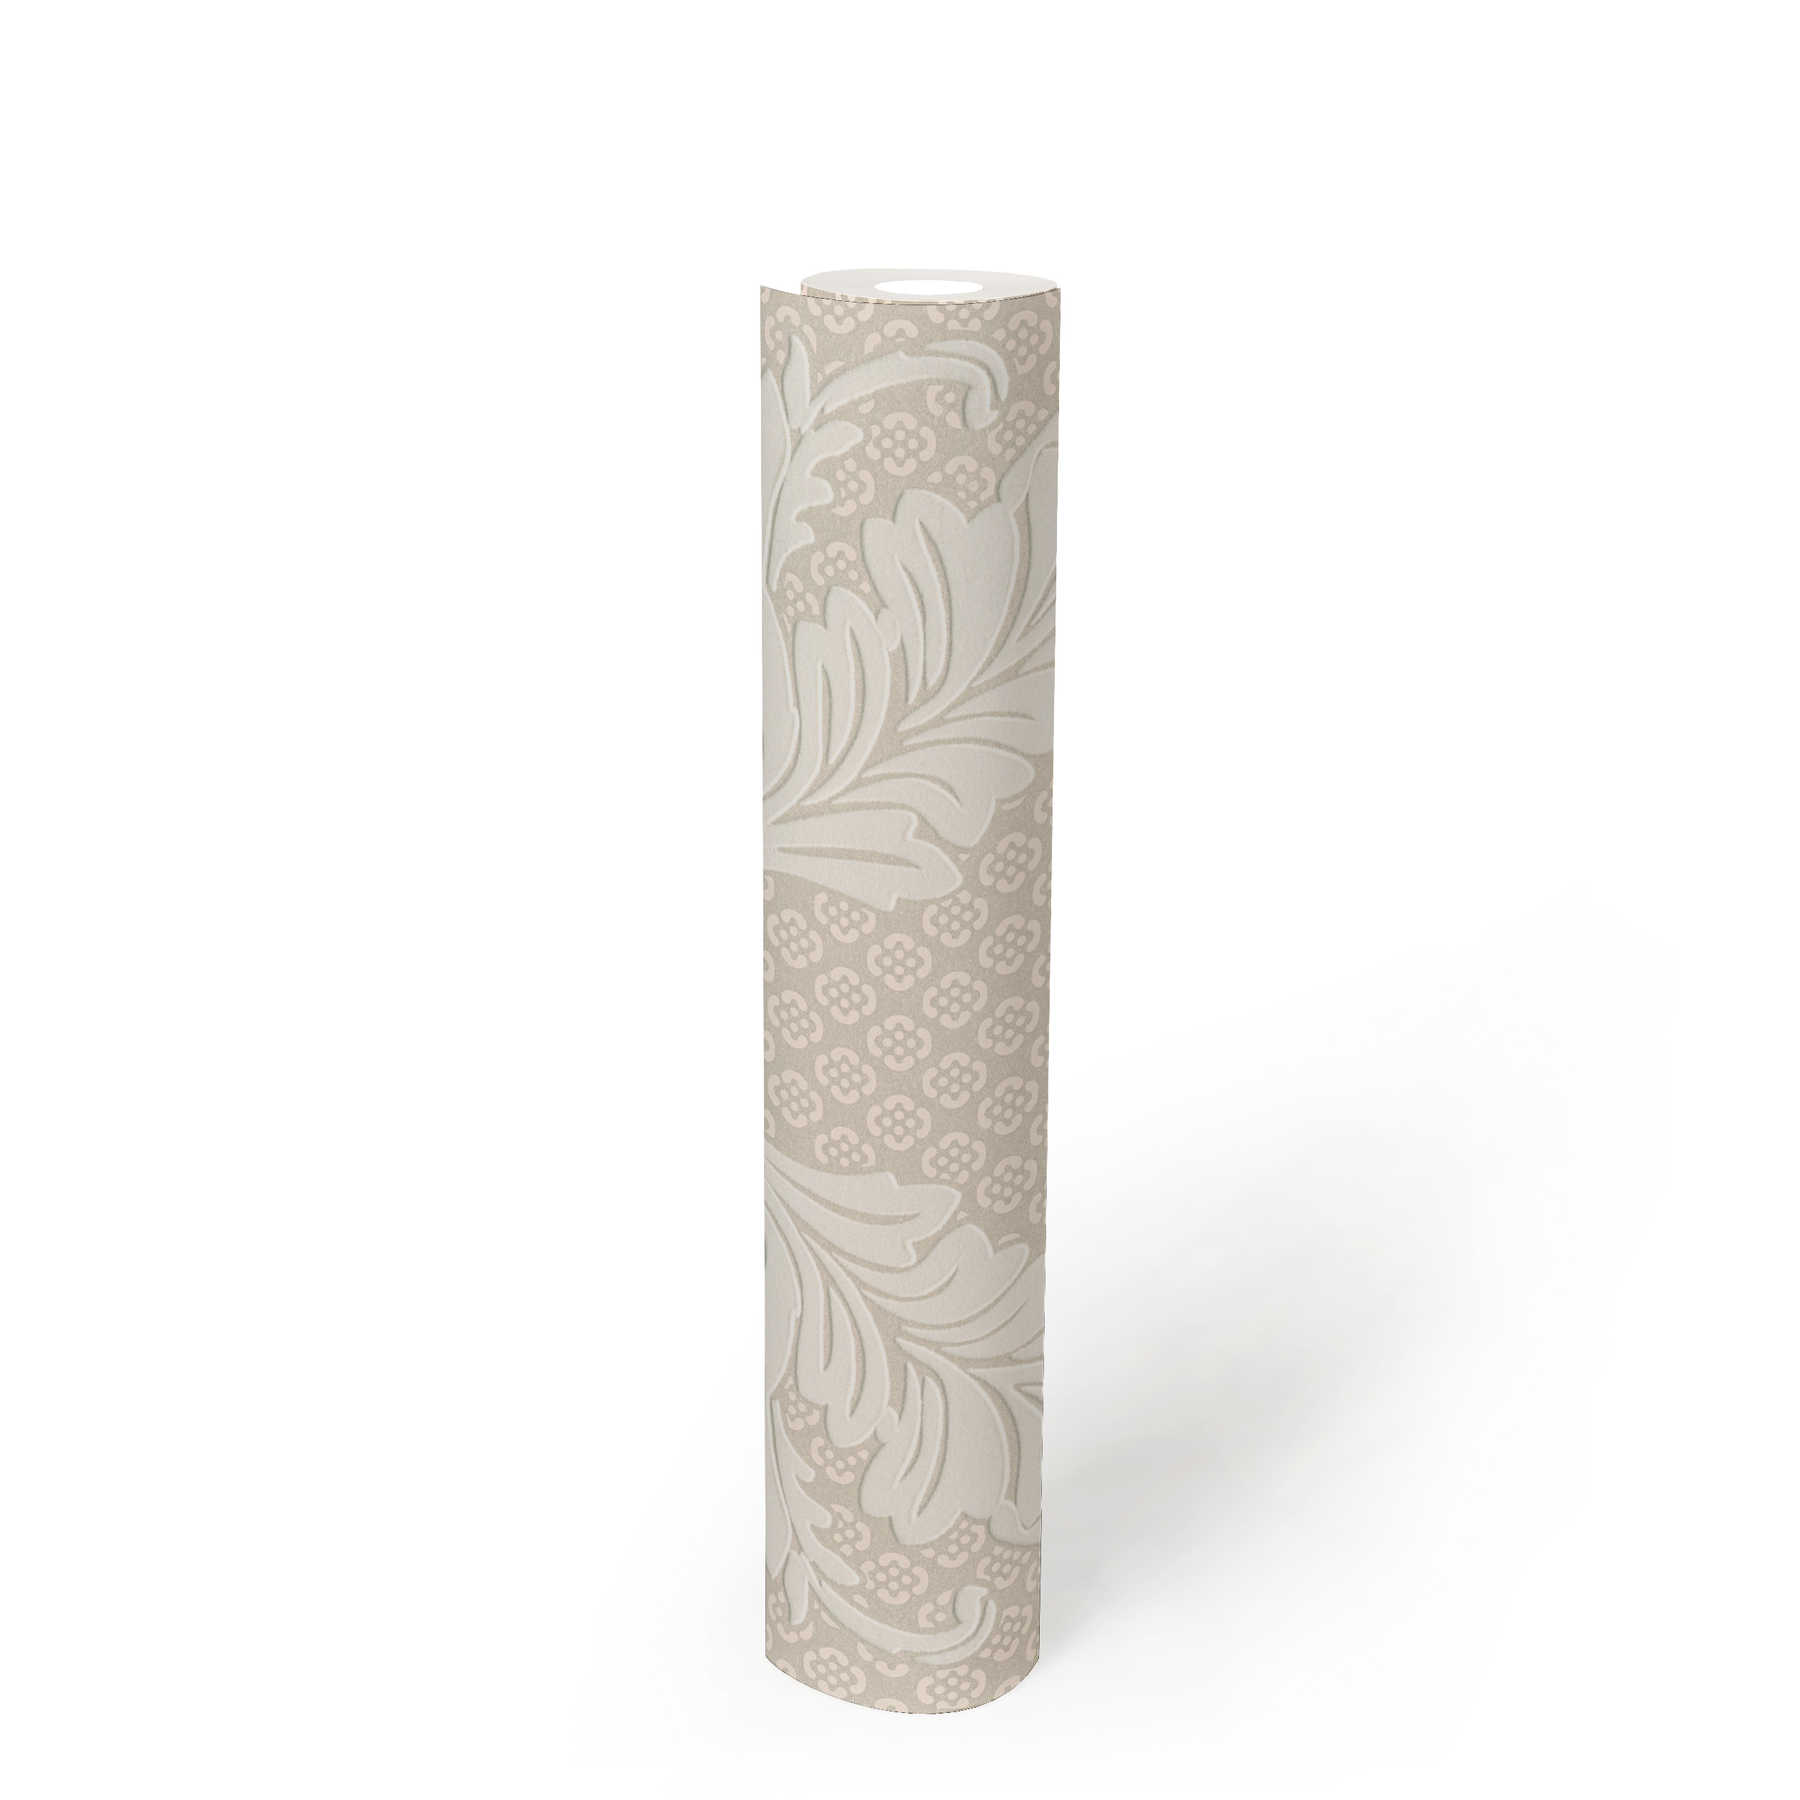             Patterned ornamental wallpaper with large floral motif - cream, bronze
        